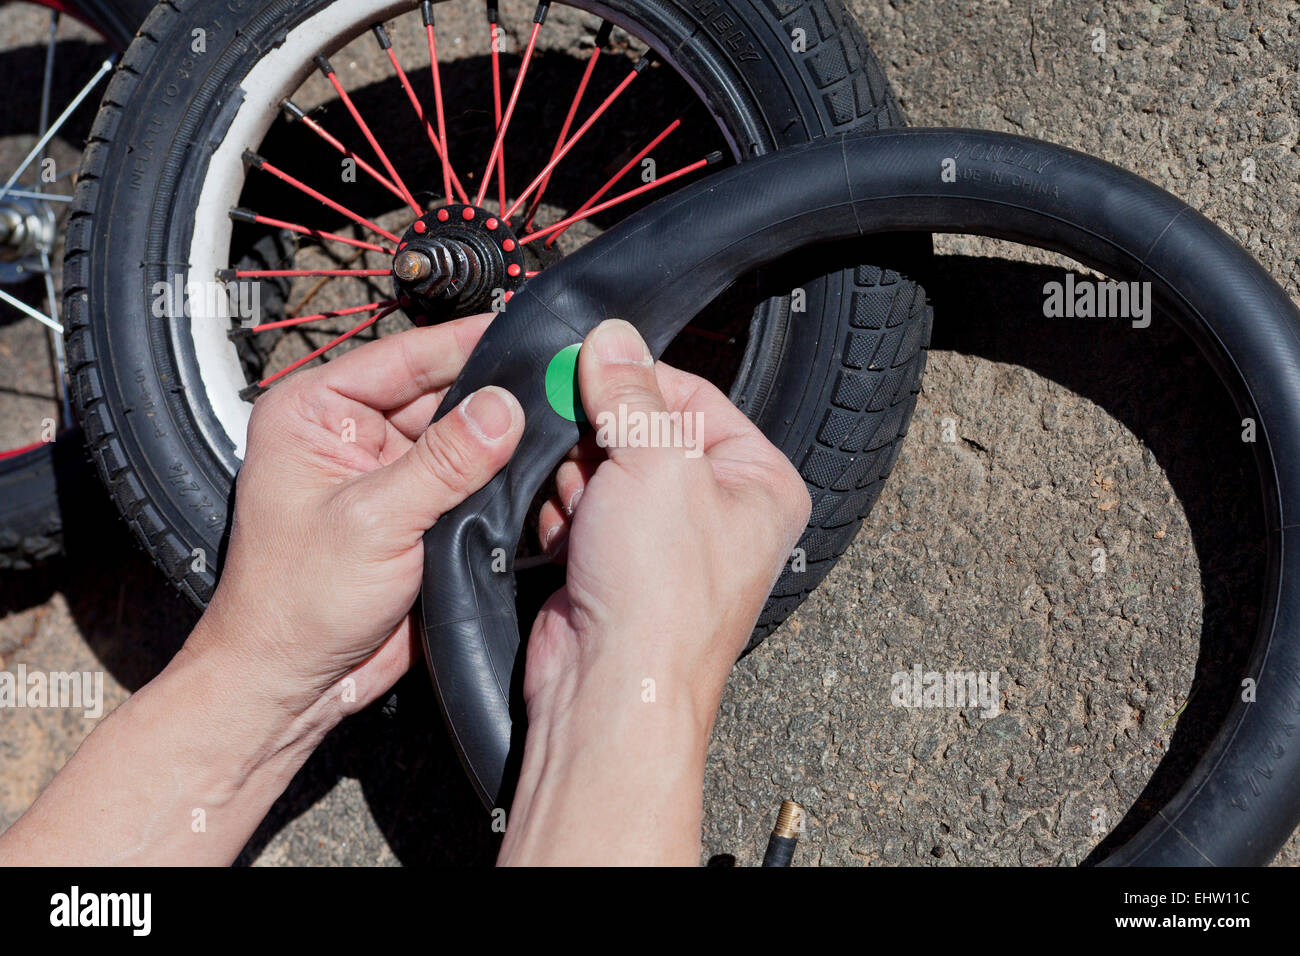 Man patching child's bicycle tire - USA Stock Photo